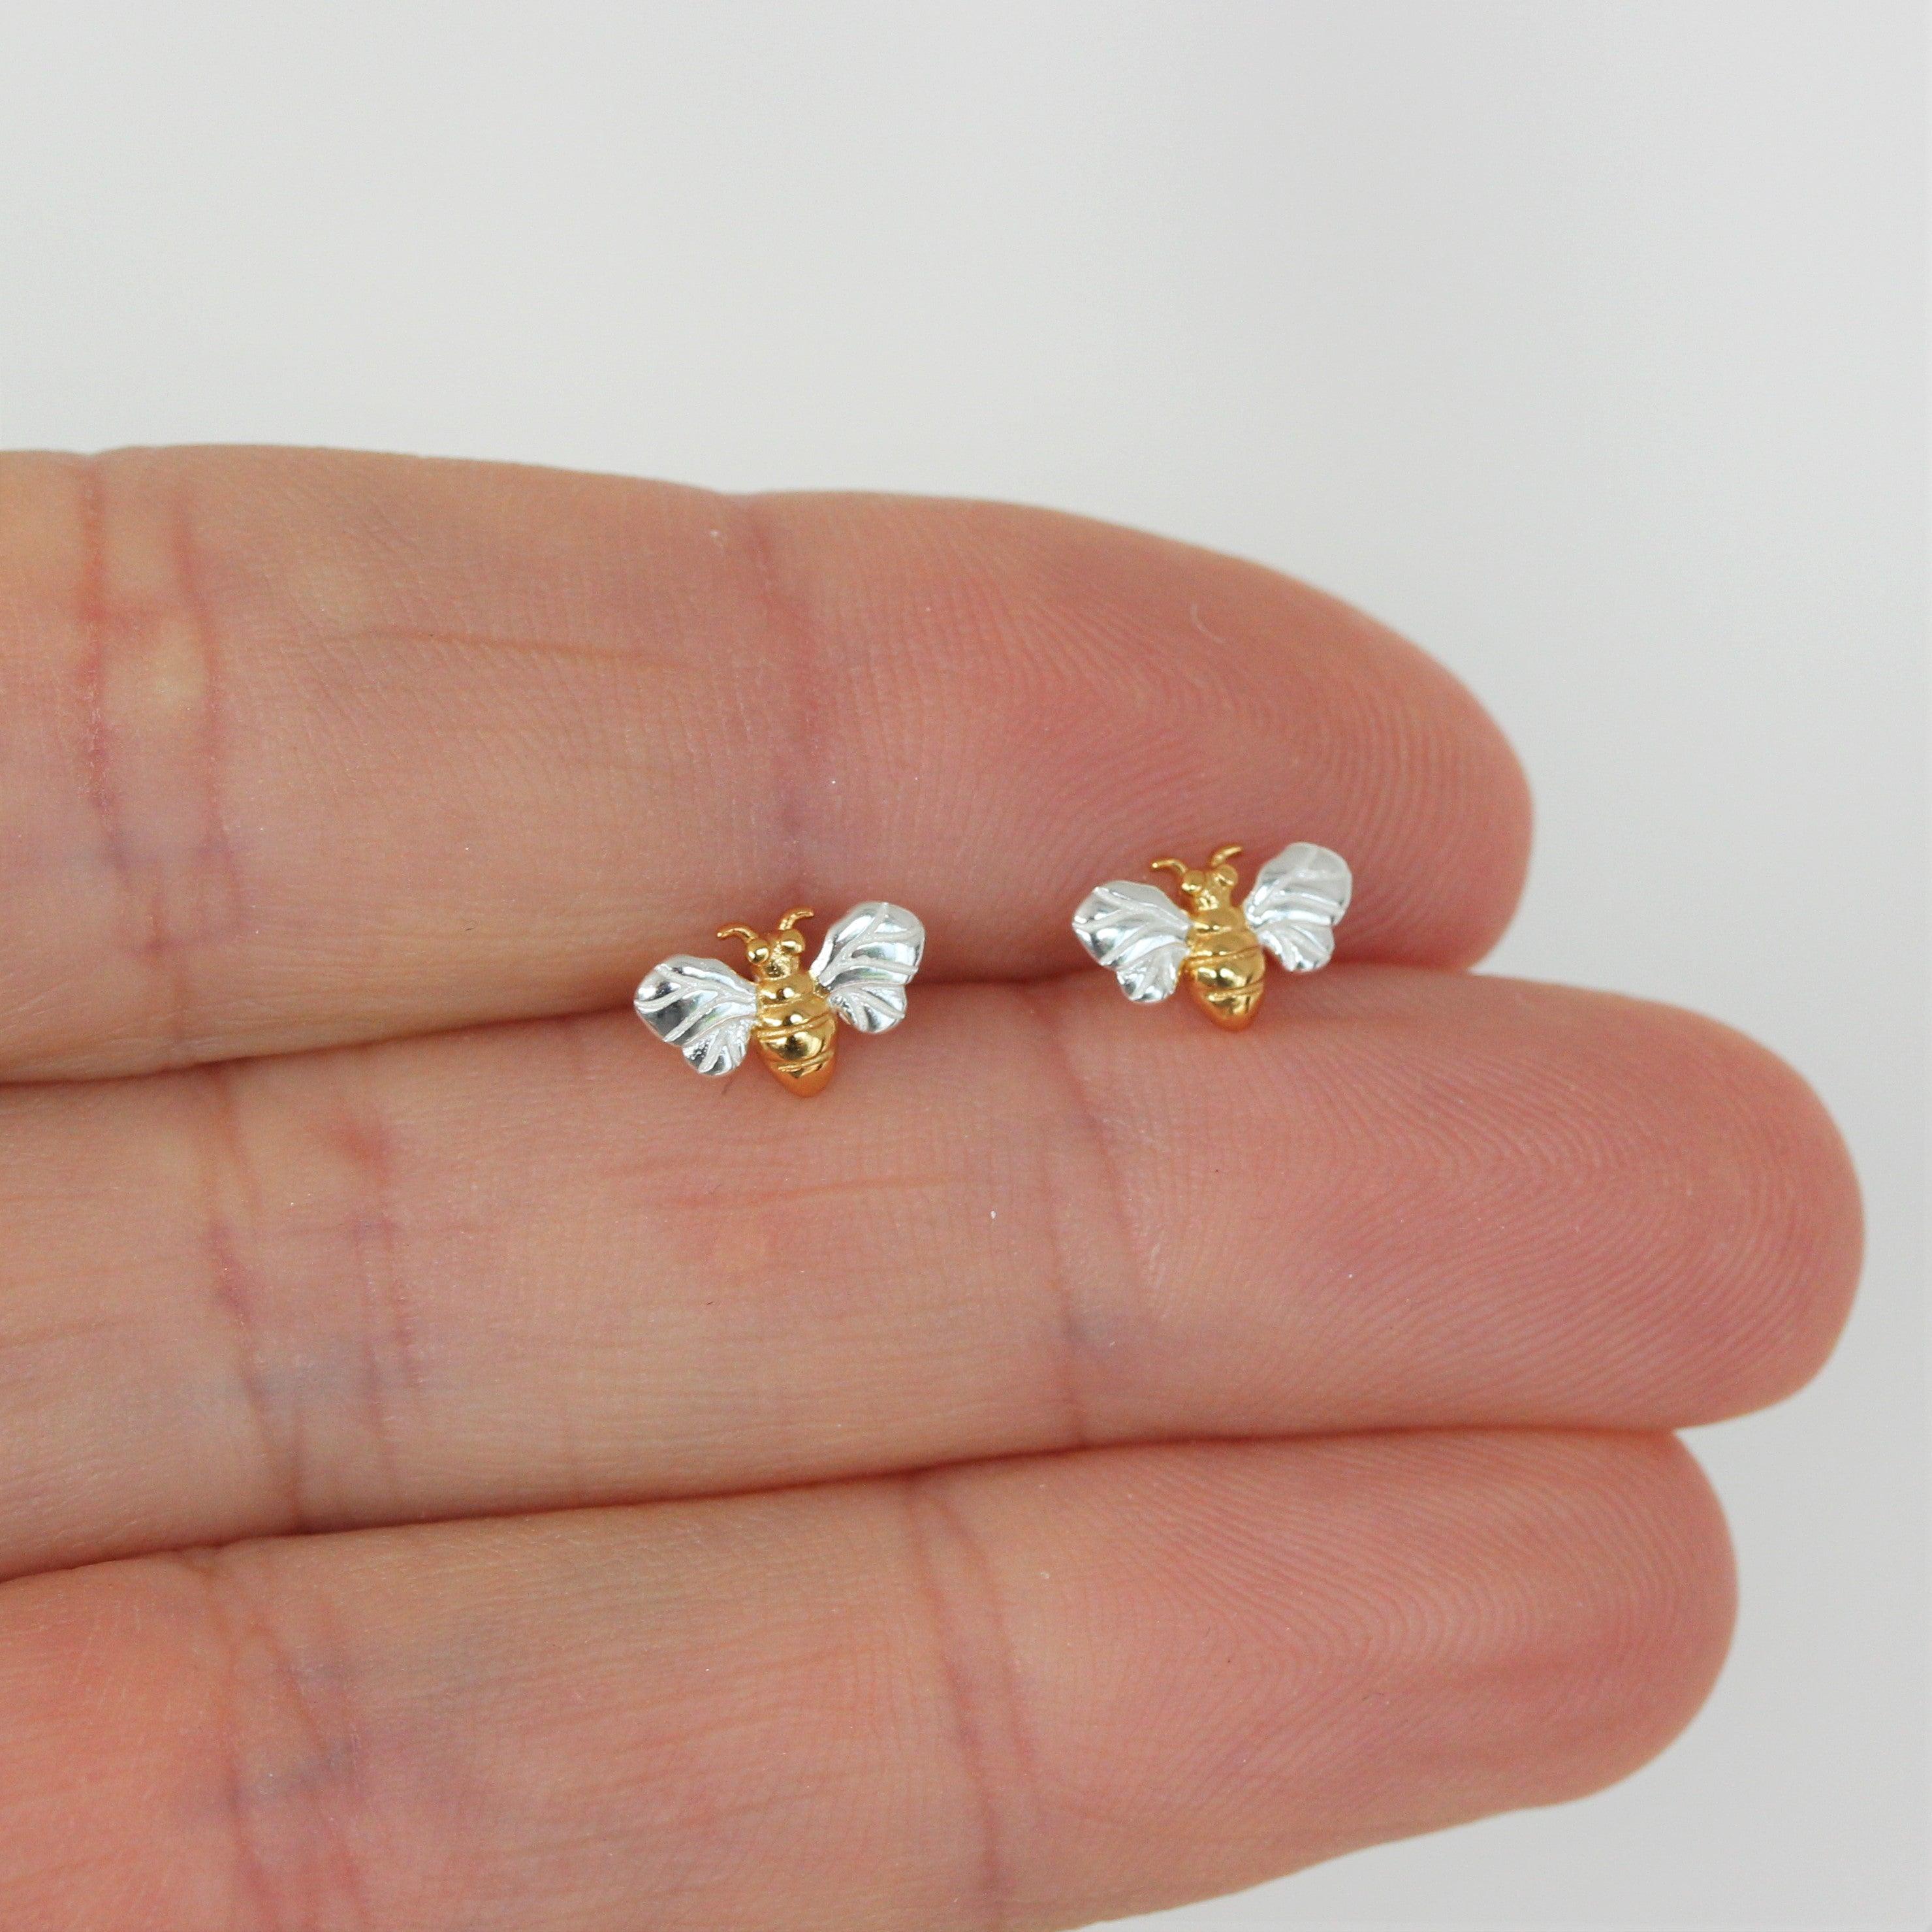 Sterling Silver Yellow Gold Plate Two Tone Small Bumblebee Bee Stud Earrings - STERLING SILVER DESIGNS